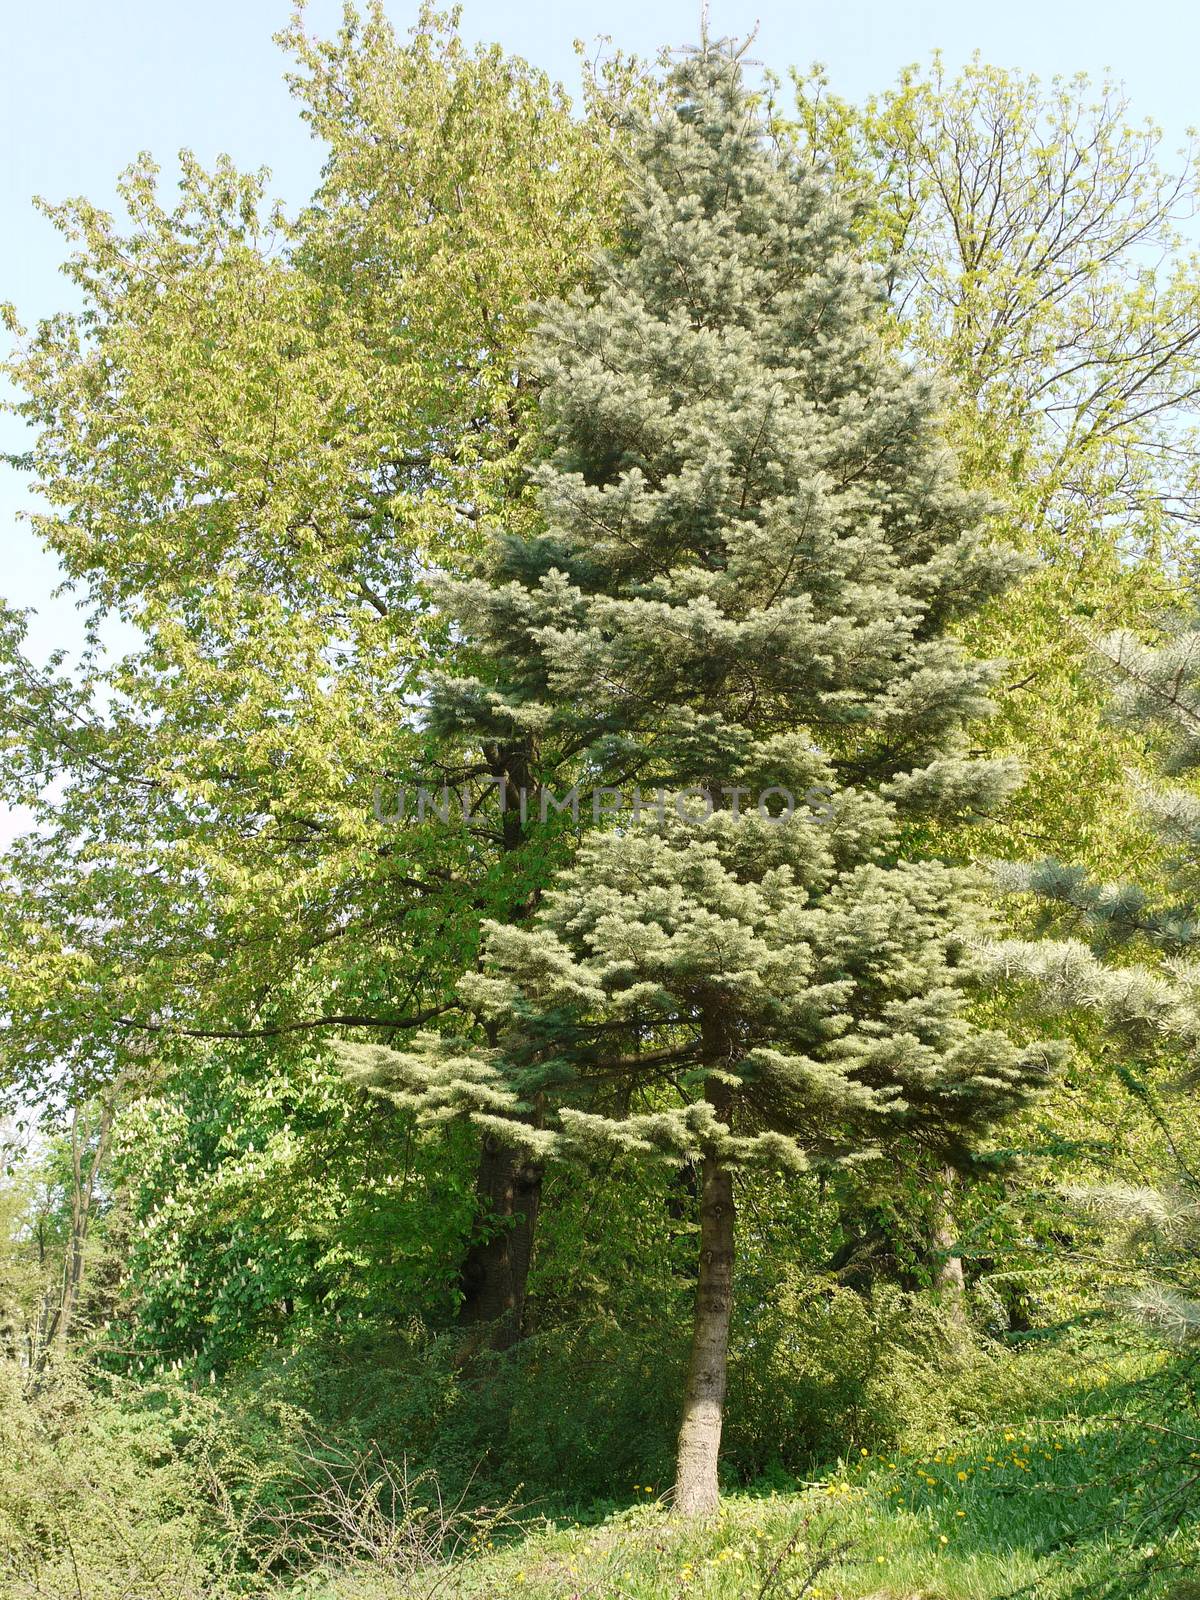 Coniferous tree against the background of other deciduous plants in the green park zone